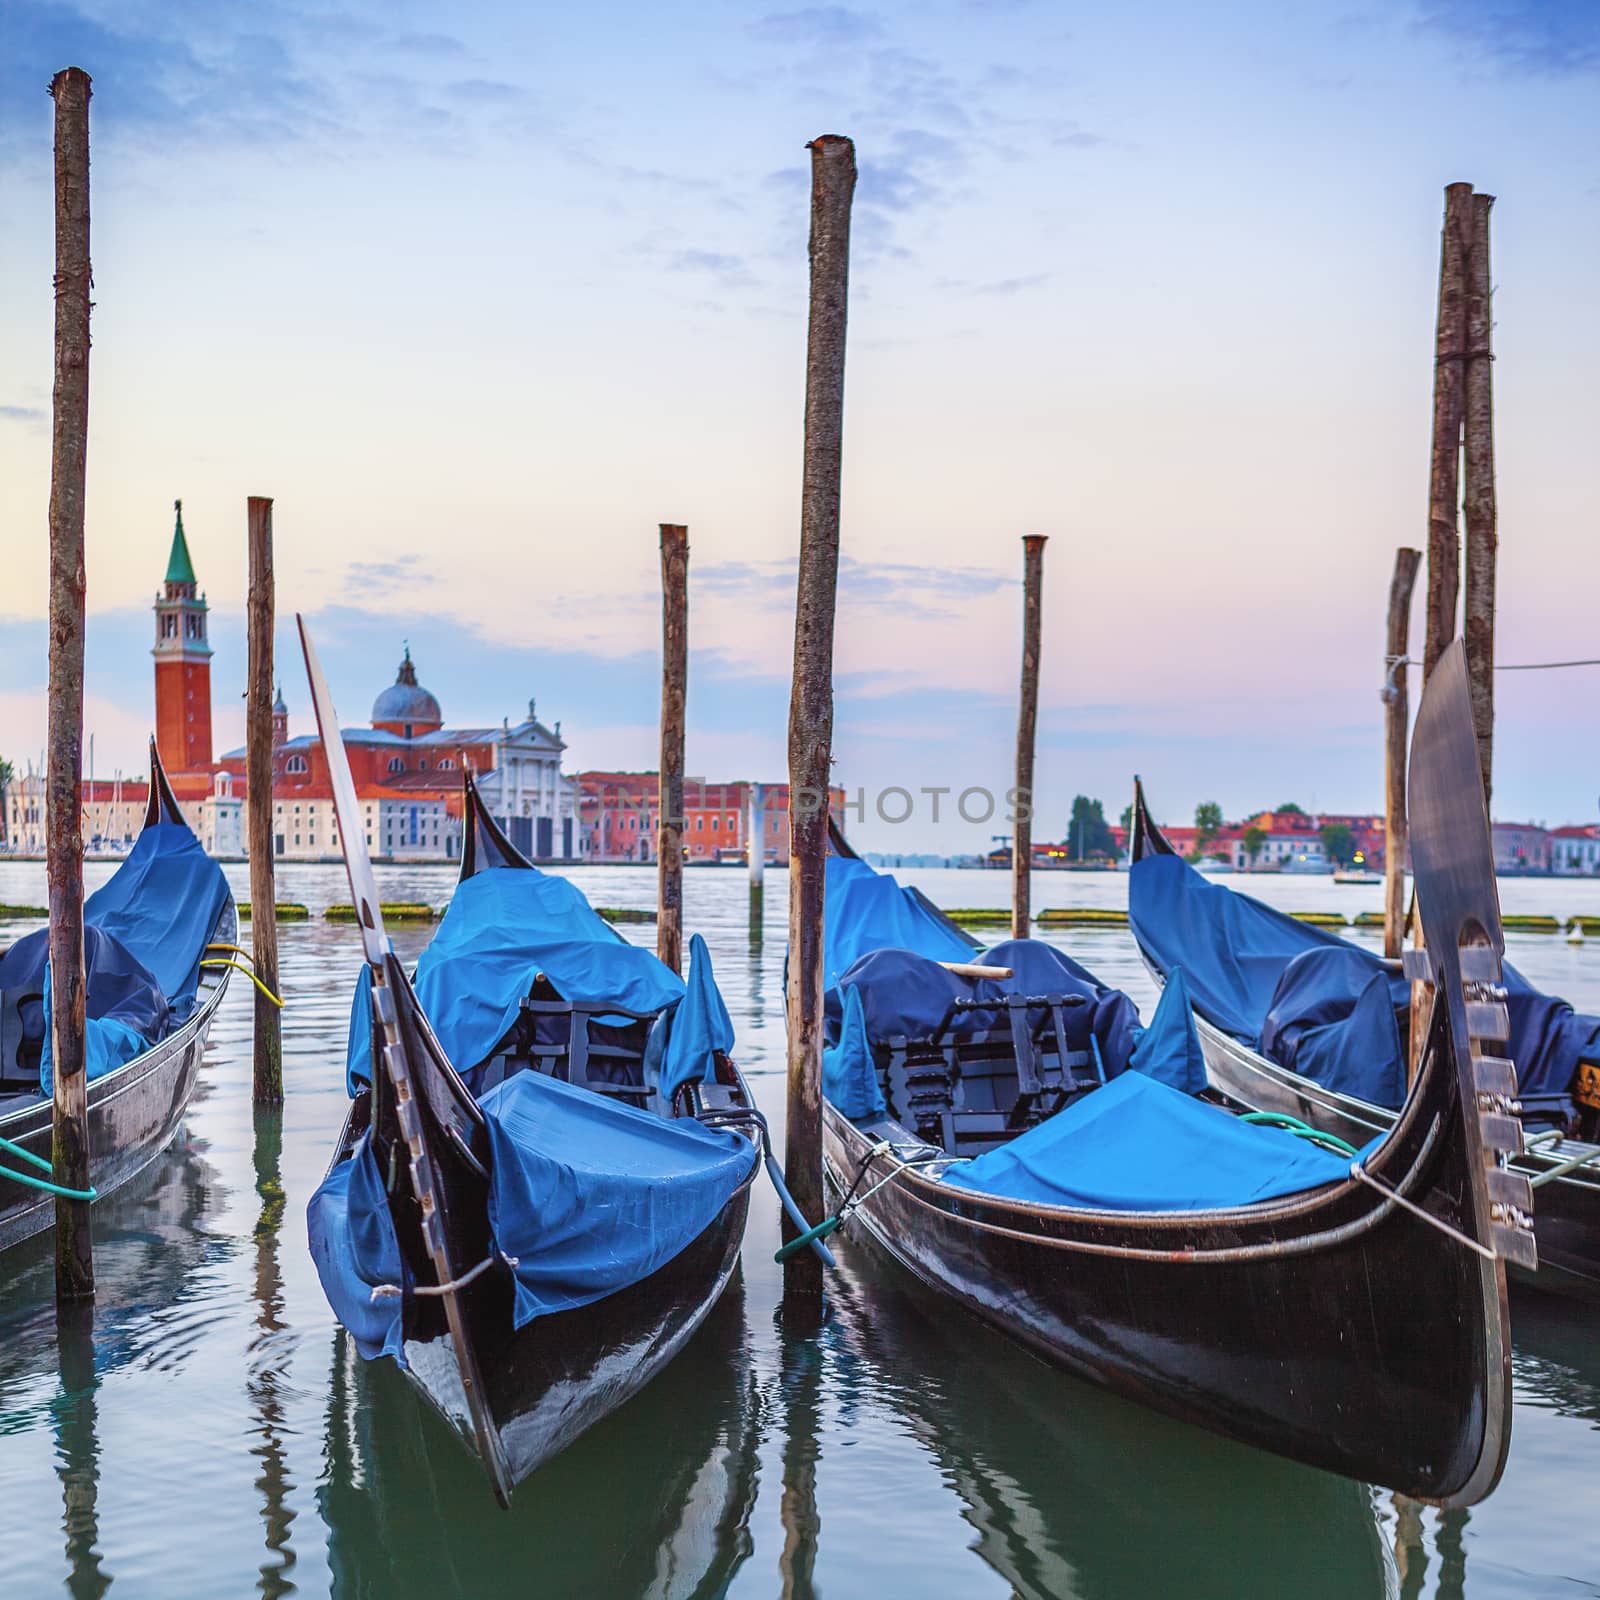 Gondolas in the Grand Canal at sunset by vwalakte